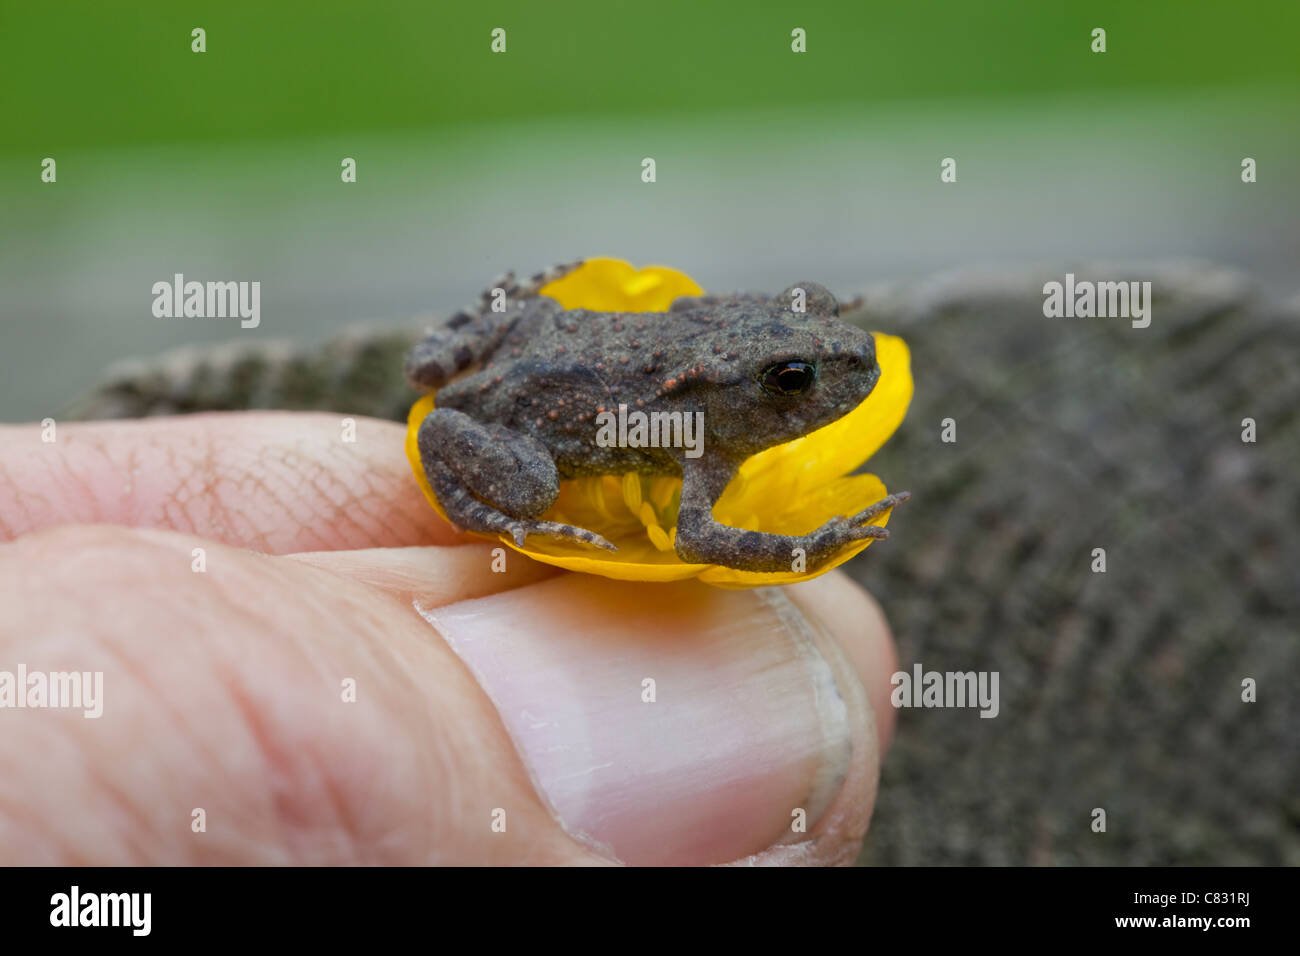 Common Toad (Bufo bufo). Recently metamorphosed 'toadlet', on buttercup flower held between fingers. Rescued from lawn before mowing. Stock Photo